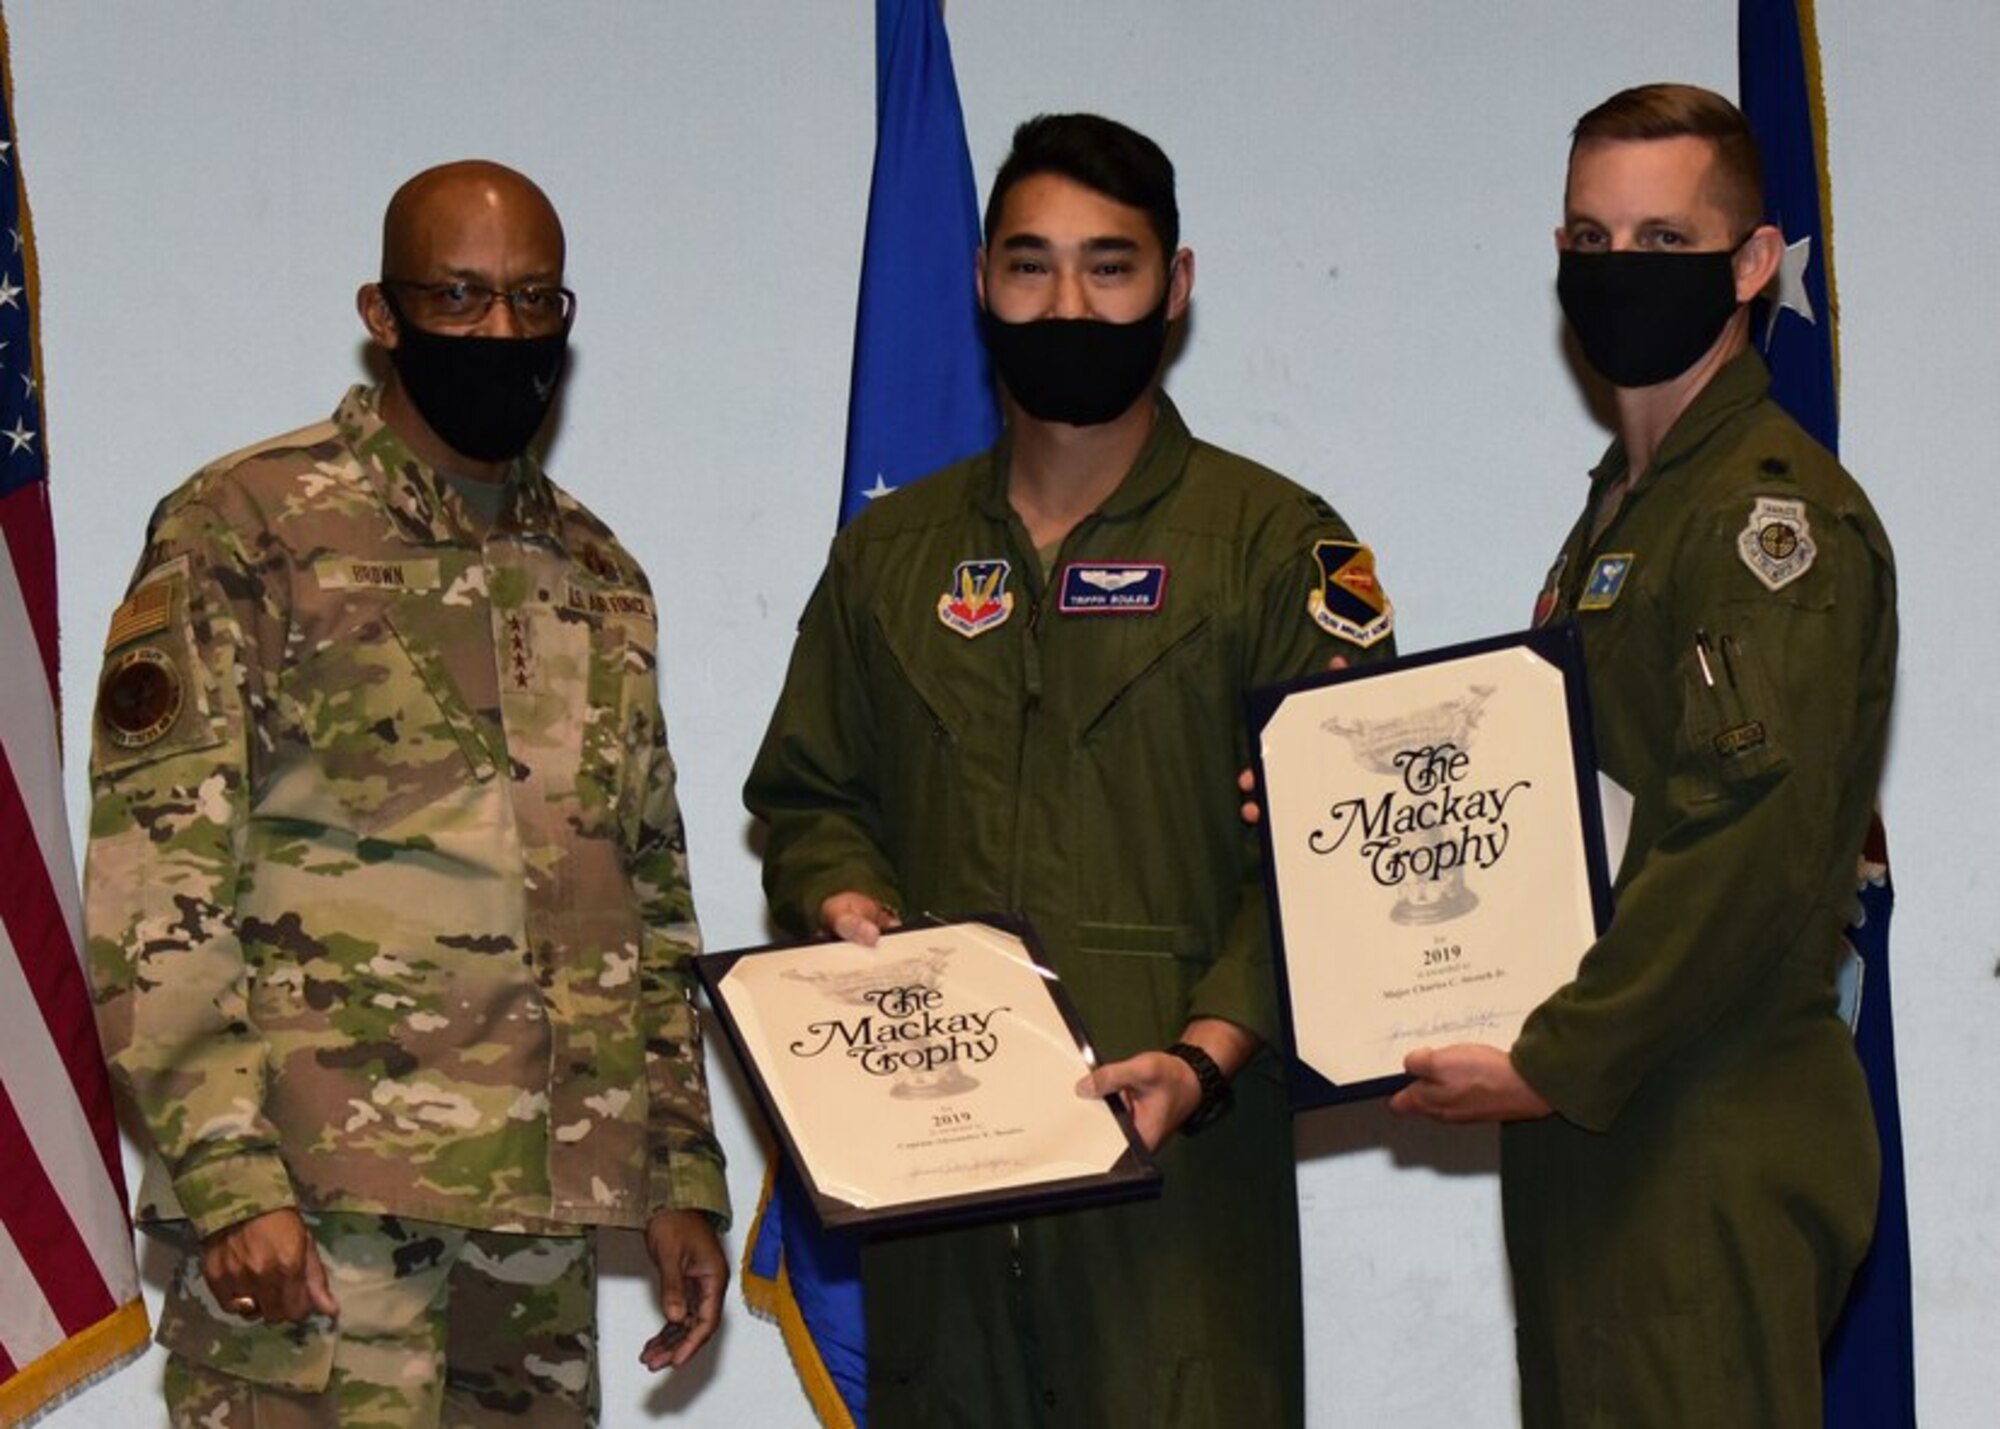 Brown presented Boules and Stretch with the 2019 MacKay Trophy, for “Most Meritorious Flight,” for a historic combat mission they flew over Afghanistan.